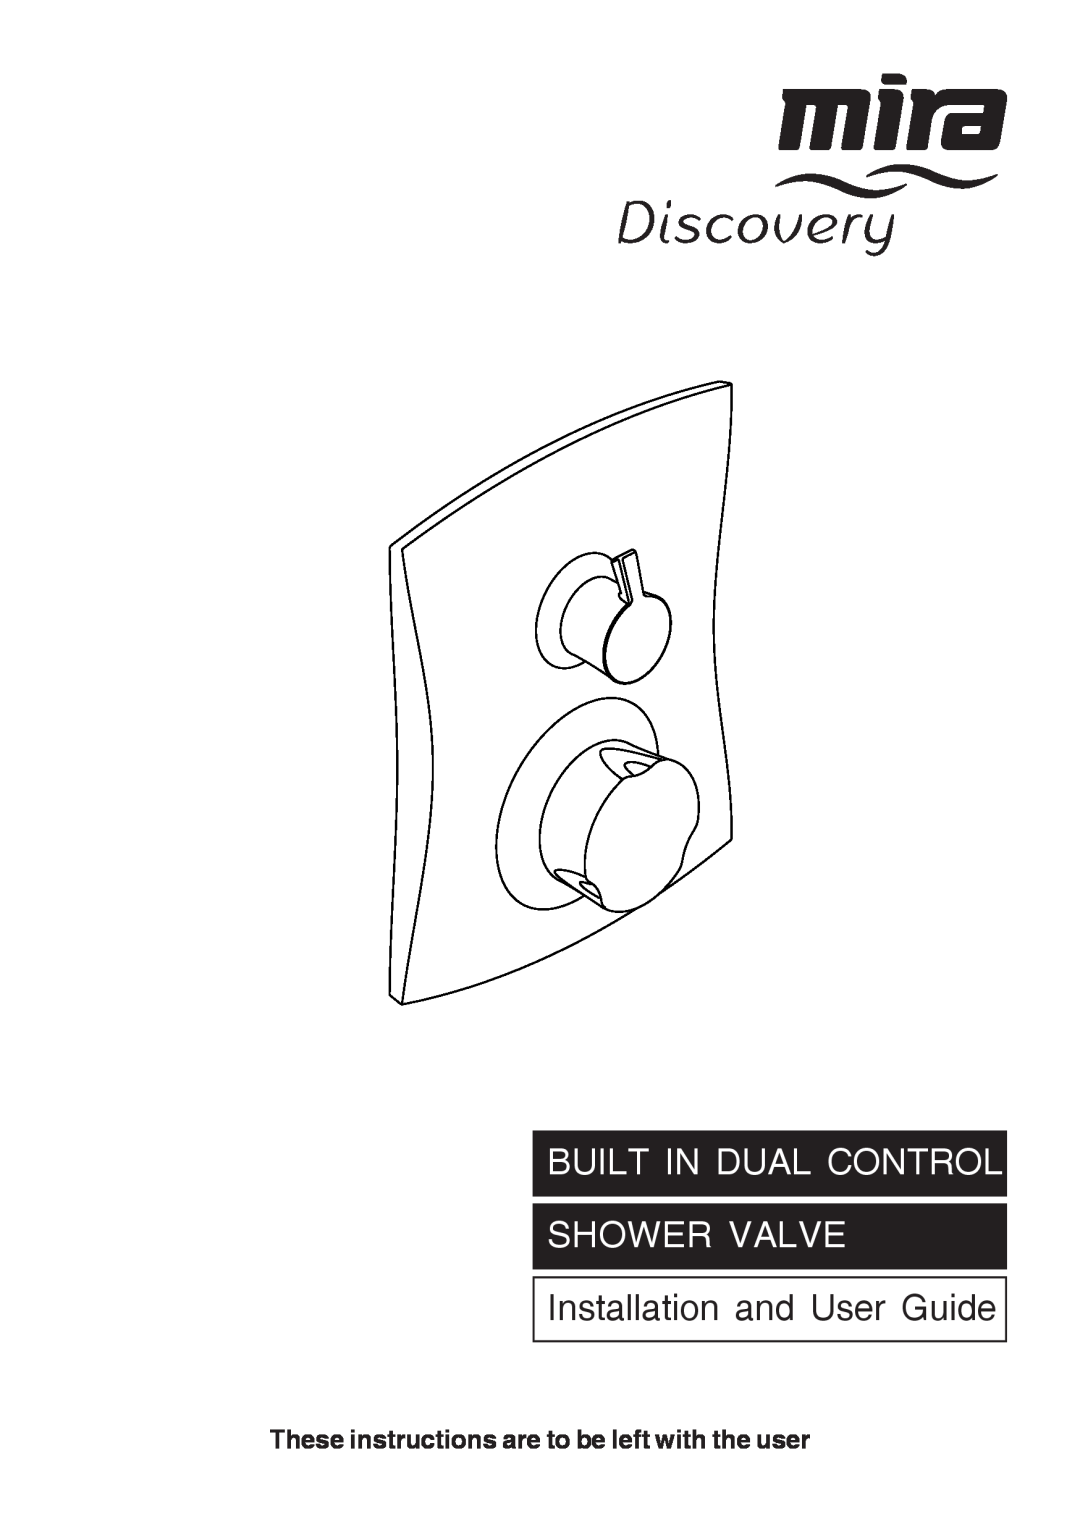 Kohler Discovery manual These instructions are to be left with the user, Built In Dual Control Shower Valve 